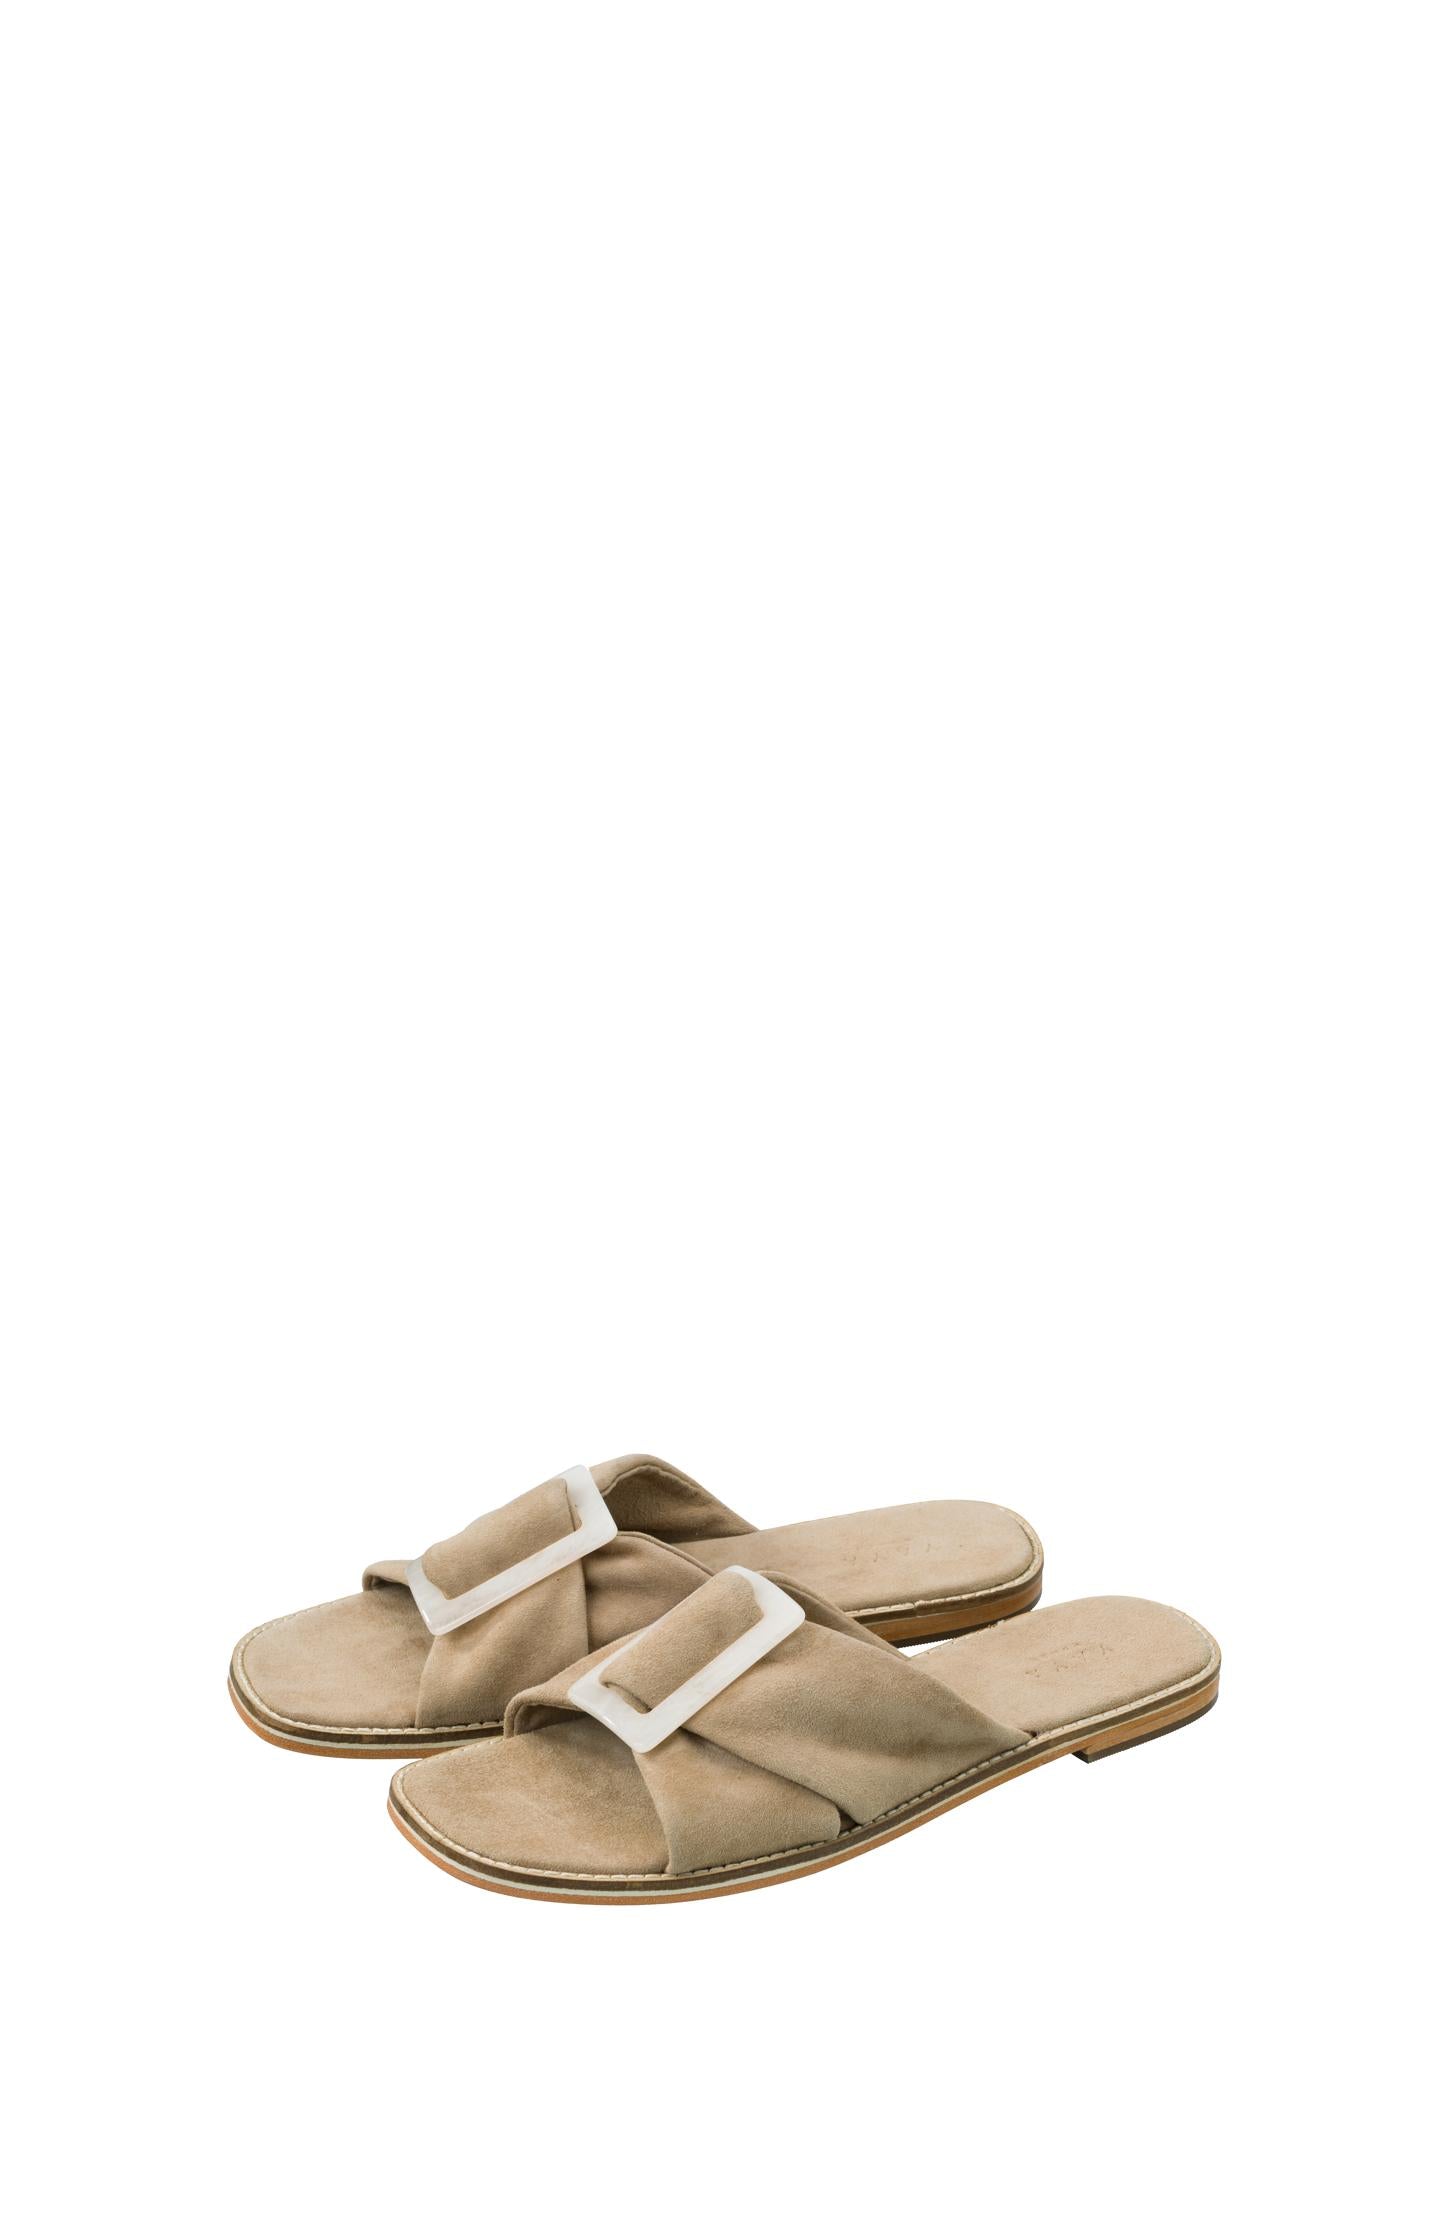 Suede slipper with buckle and crossed straps - Weathered Teak Green - Type: product